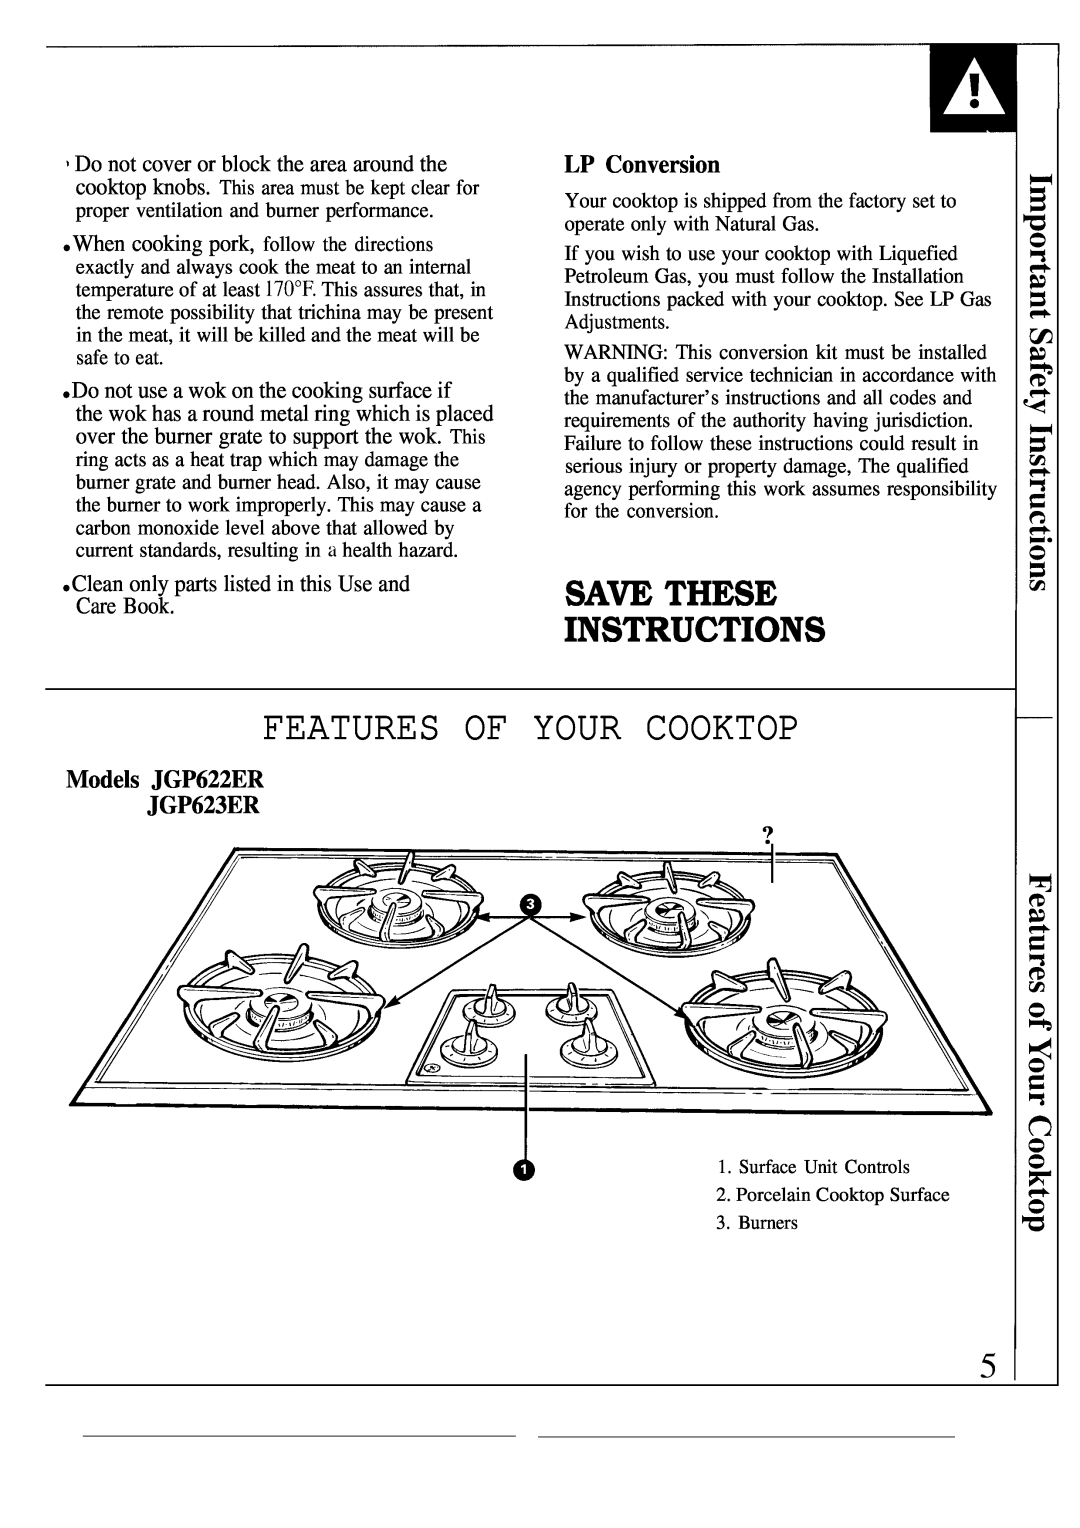 GE operating instructions LP Conversion, Models JGP622ER JGP623ER, Features Of Your Cooktop, Save These Instructions 